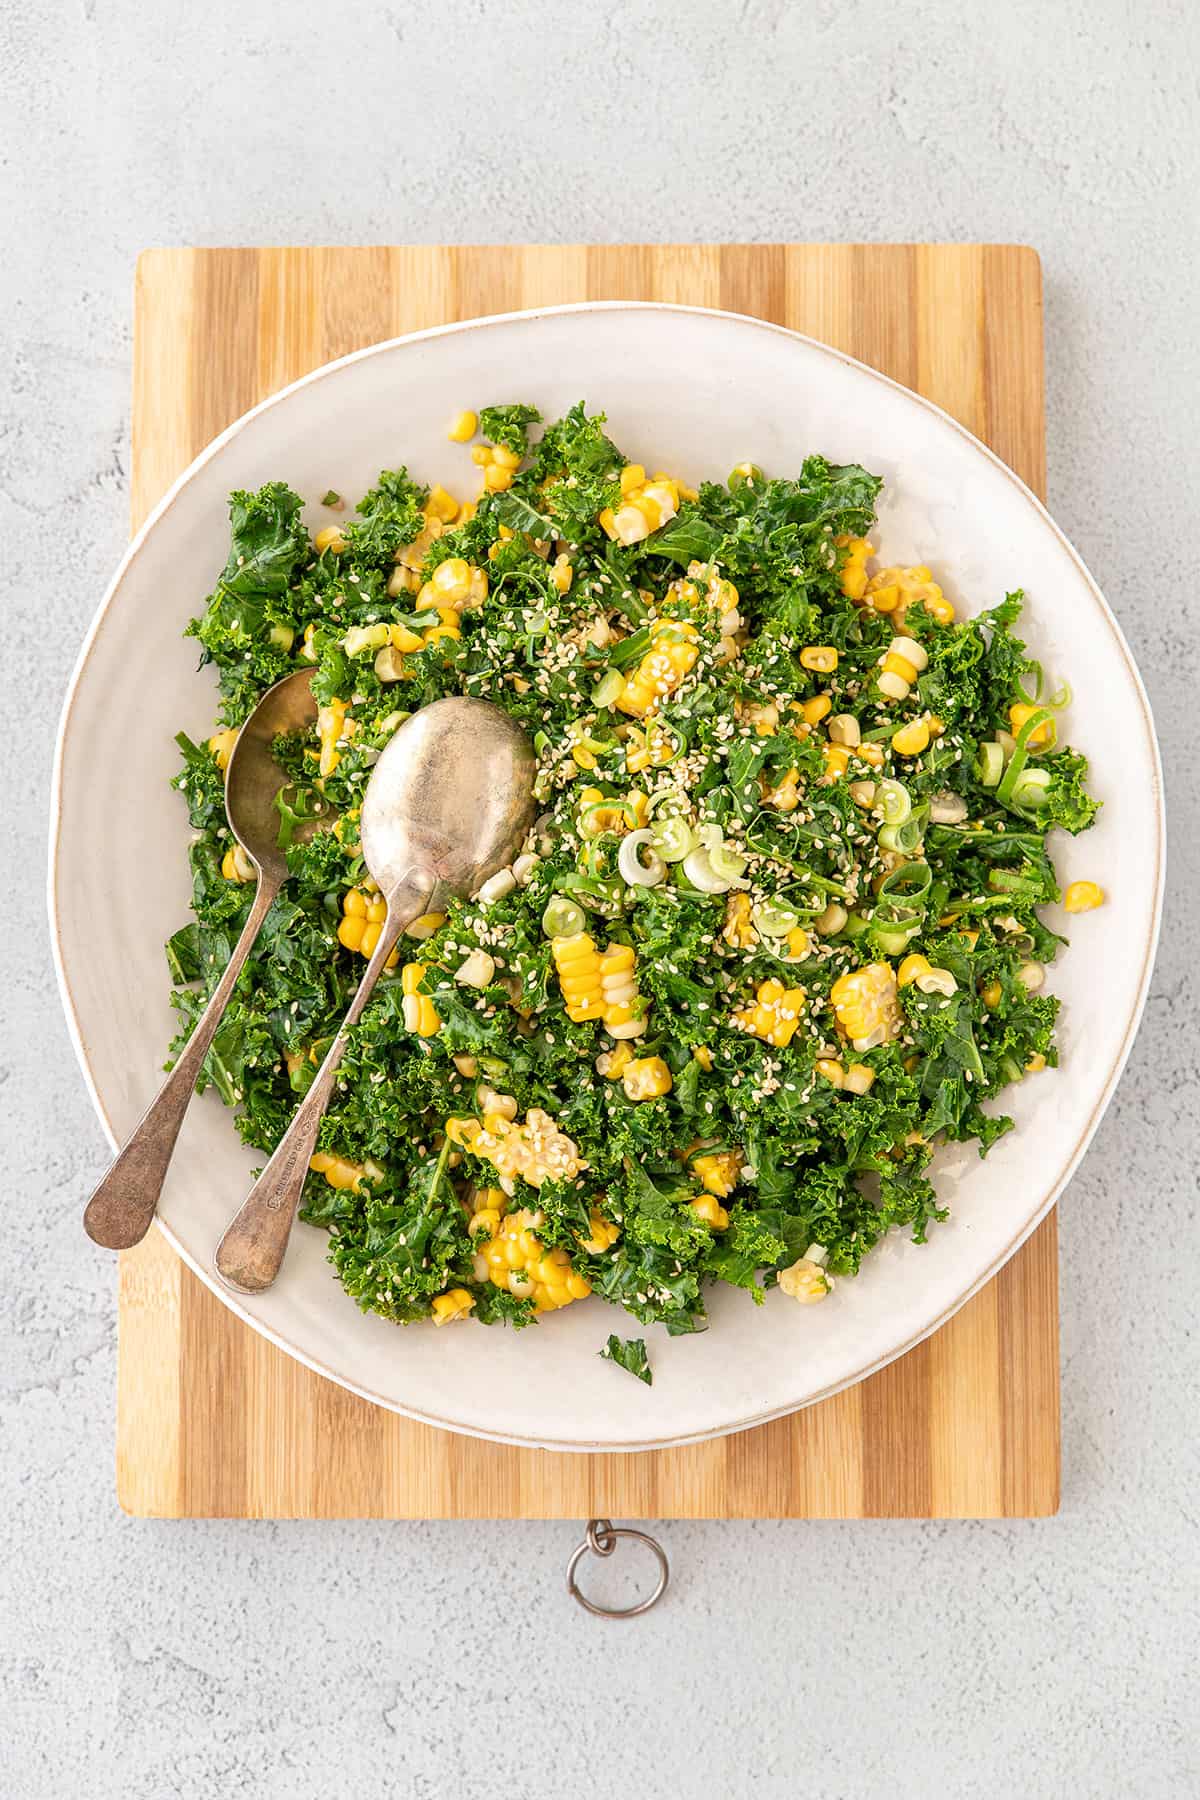 A wide white bowl with sweetcorn and kale salad in it, sitting on a bamboo chopping board. A whole cob of corn is in the background. Photo taken from above.